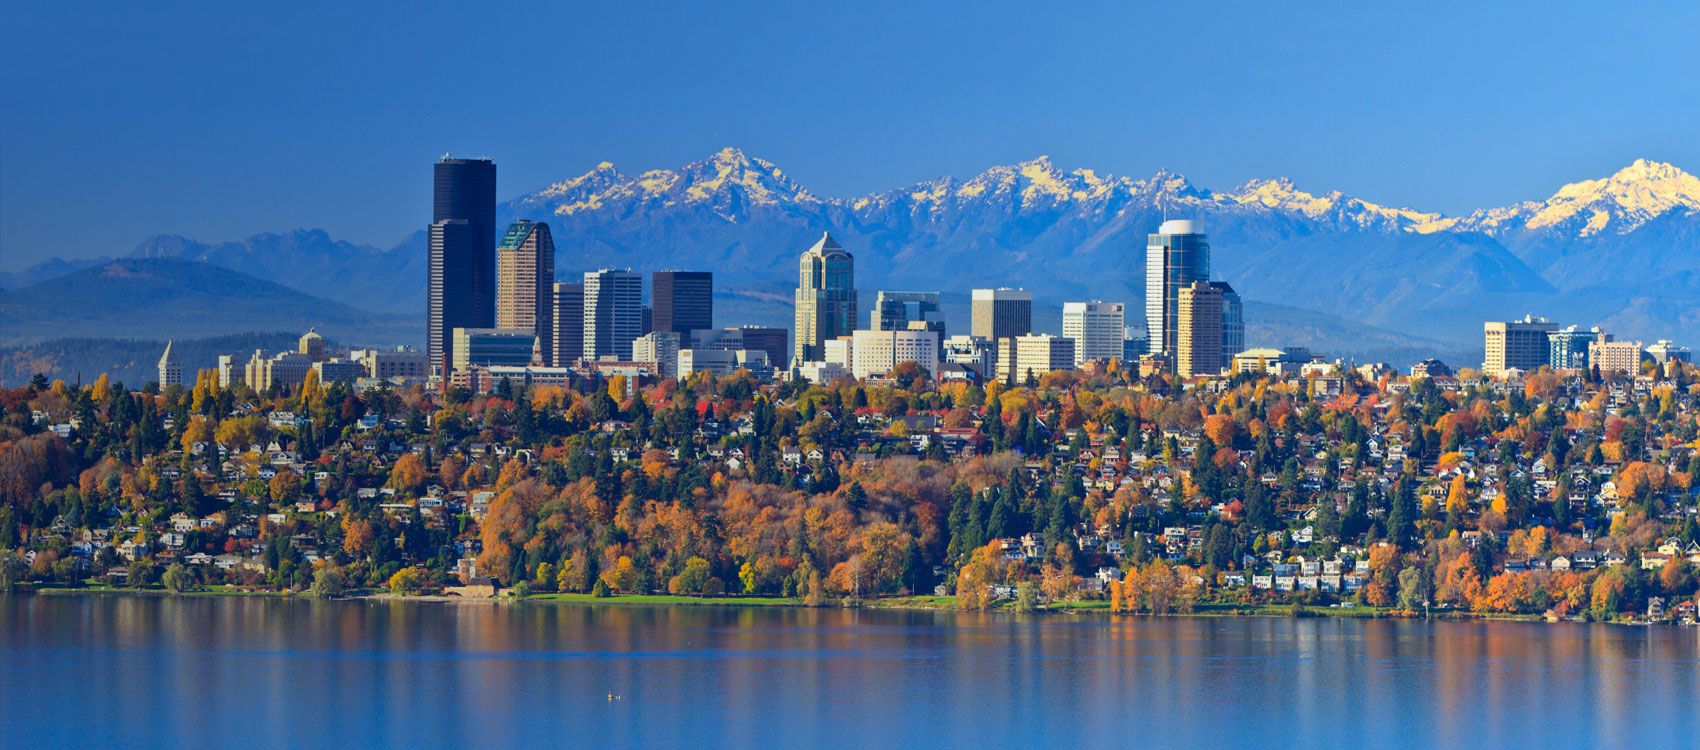 snow capped mountain range with city skyline in the foreground